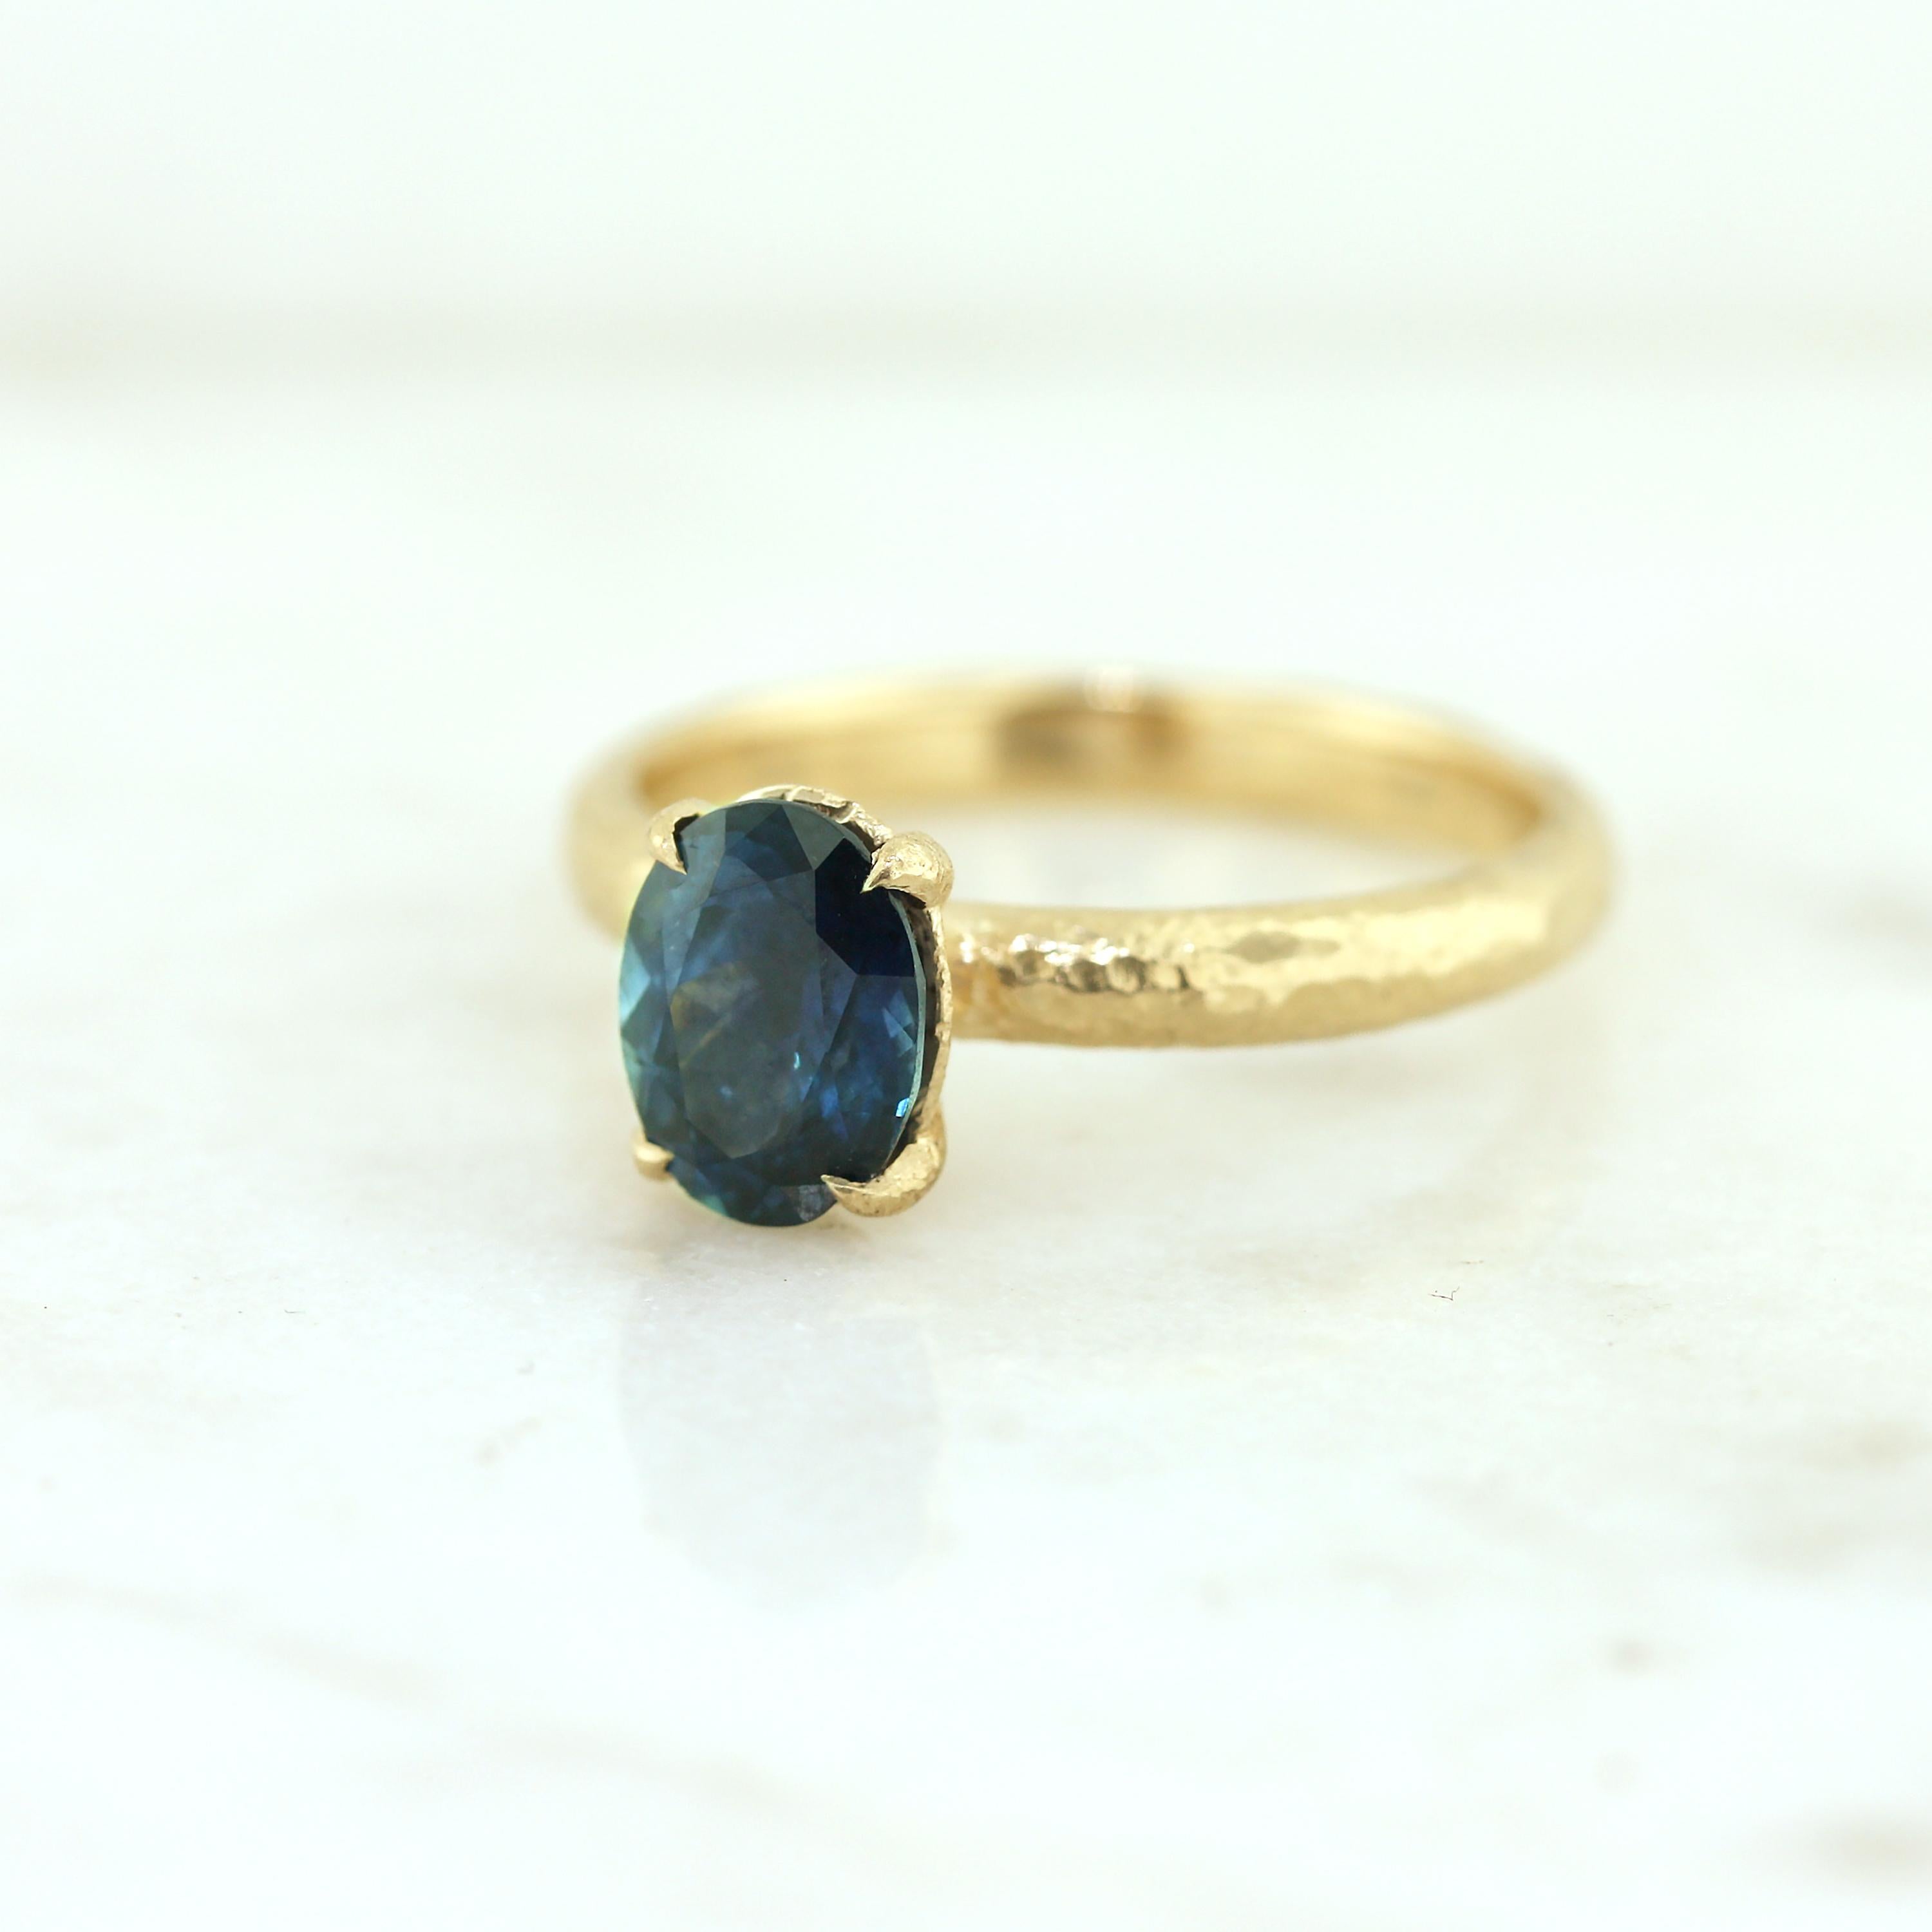 Rustic solitaire ring with signature hammered texture and a 1.93 carat deep blue Montana sapphire set in 100% recycled gold. This size and colour are rare in sapphires sourced from Montana. 
One of a kind.

- Finger size 6.25
- Available for